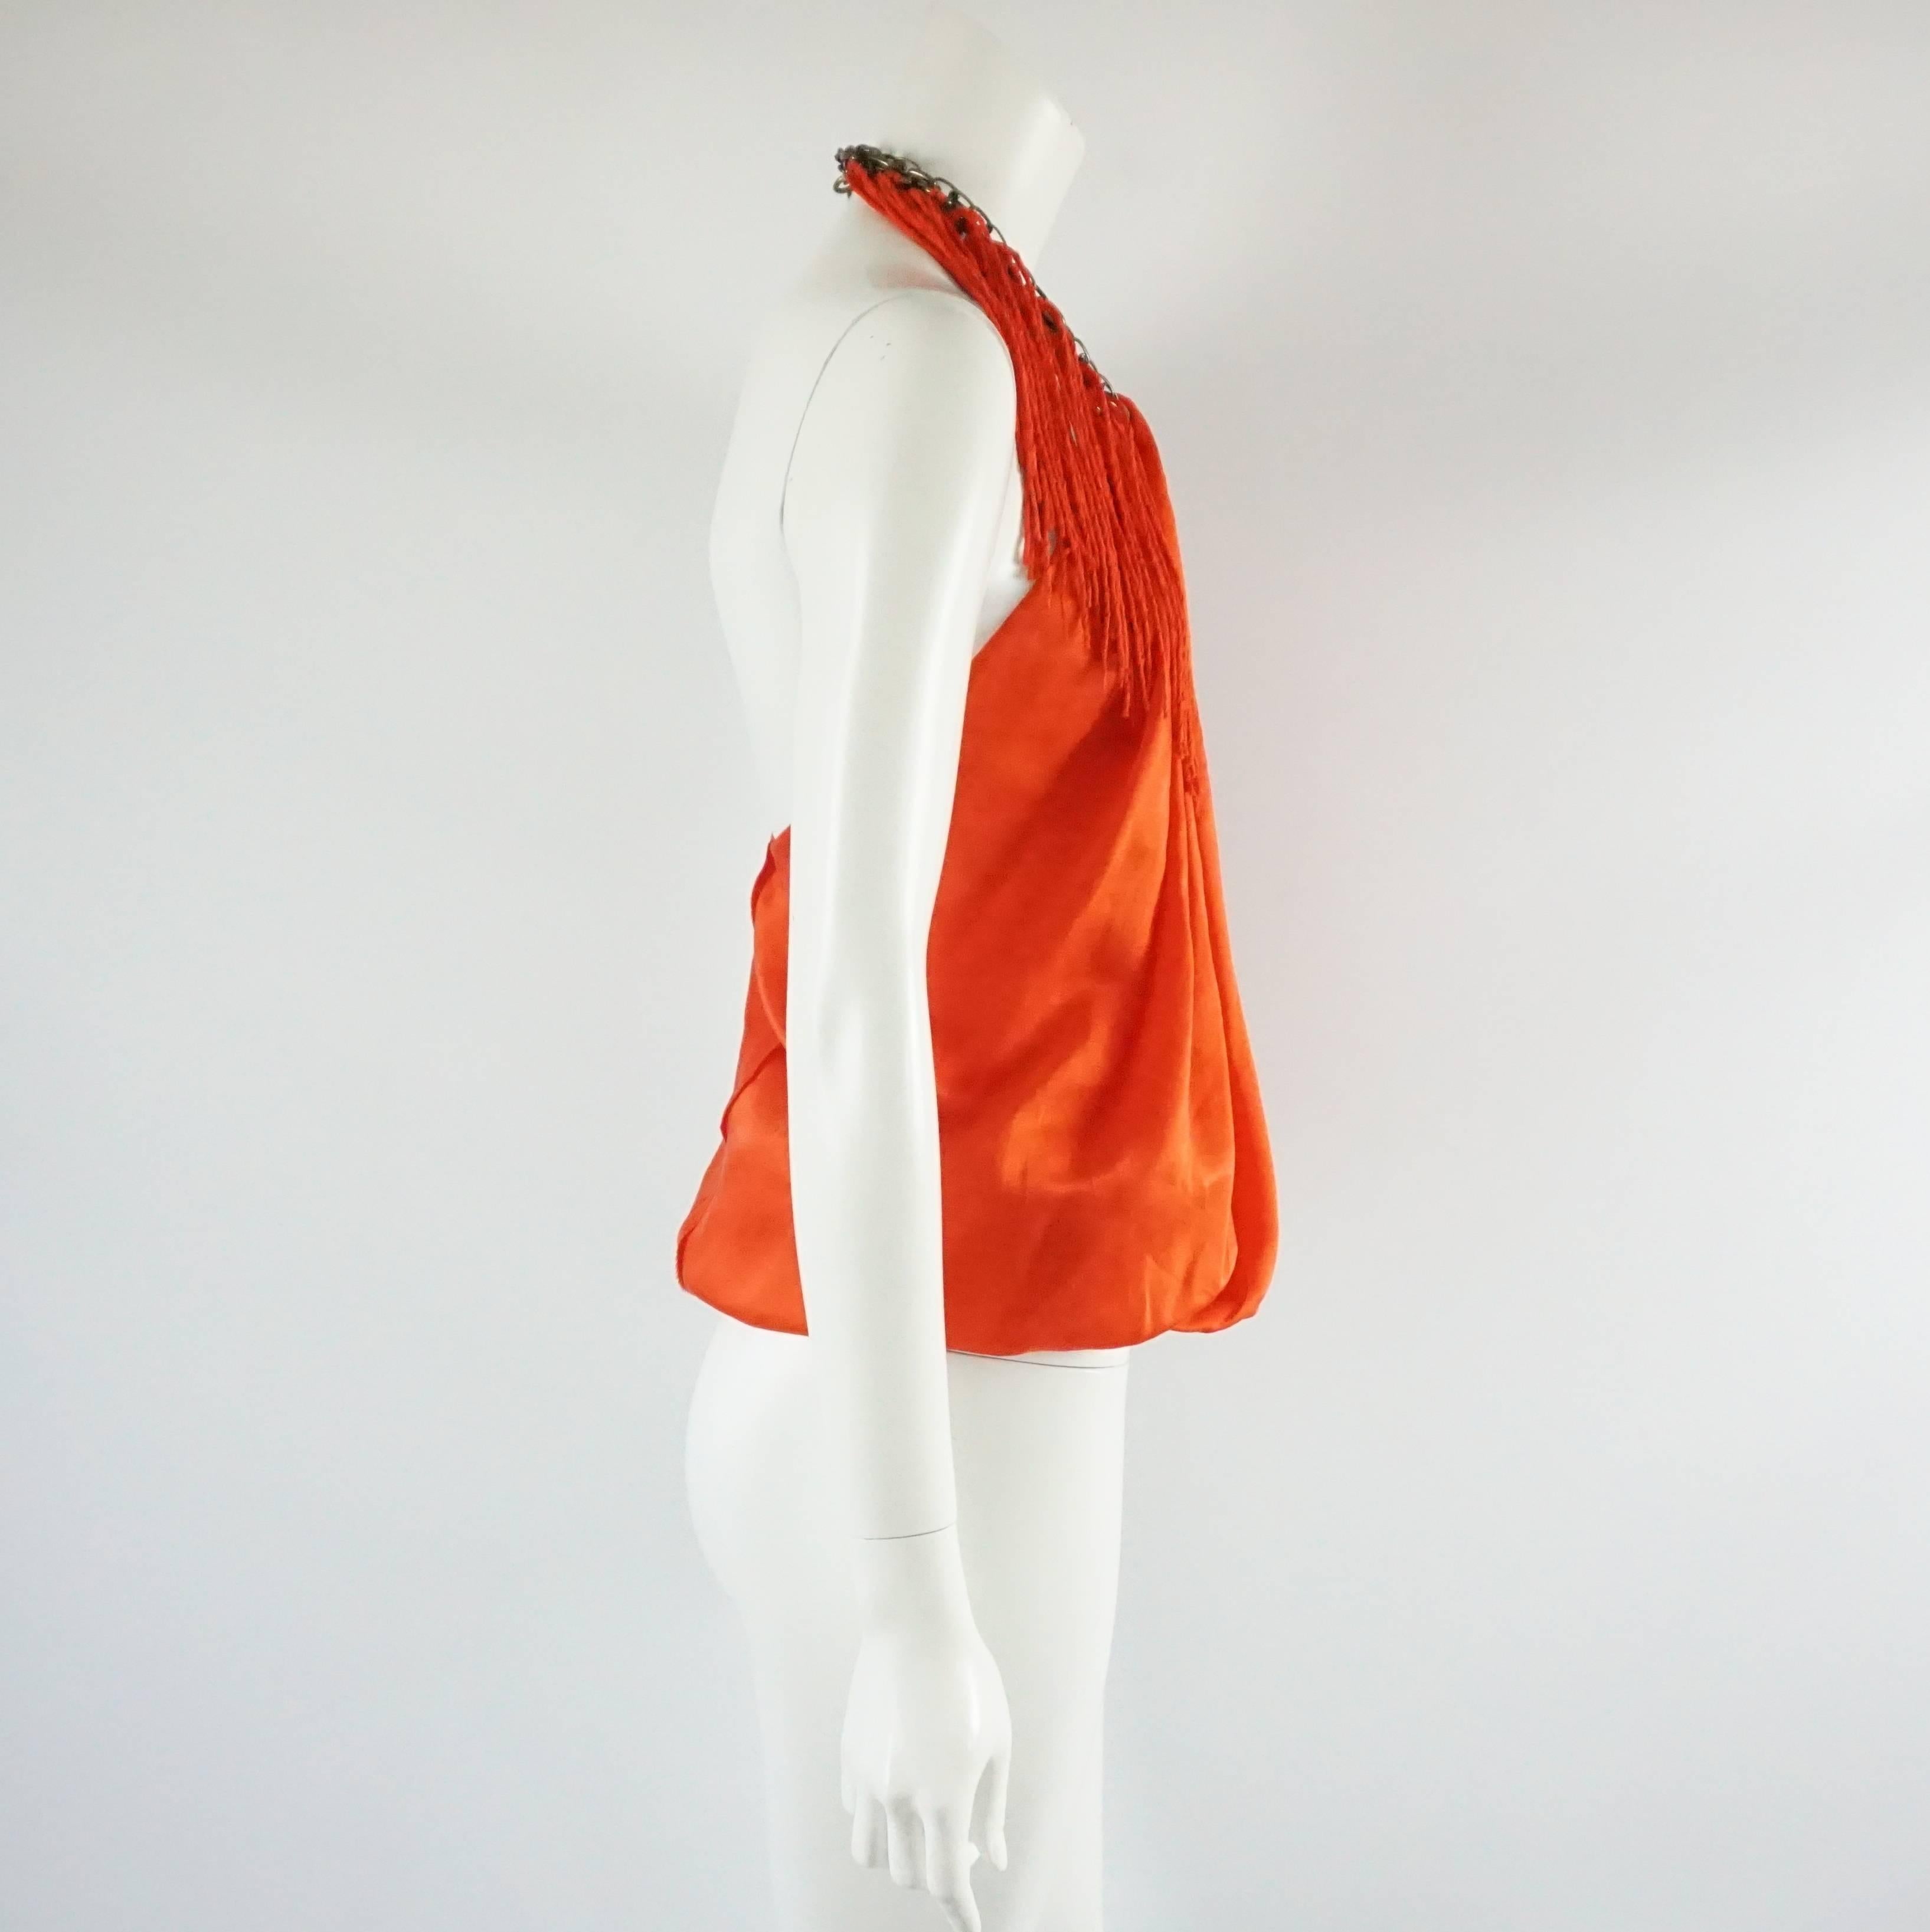 This Lanvin bright orange silk halter top has a chain by the neckline with hanging fringe tassels. The top is in good condition with a couple minor markings as shown in the last images. Size 38. 

Measurements
Bust: 35"
Waist: